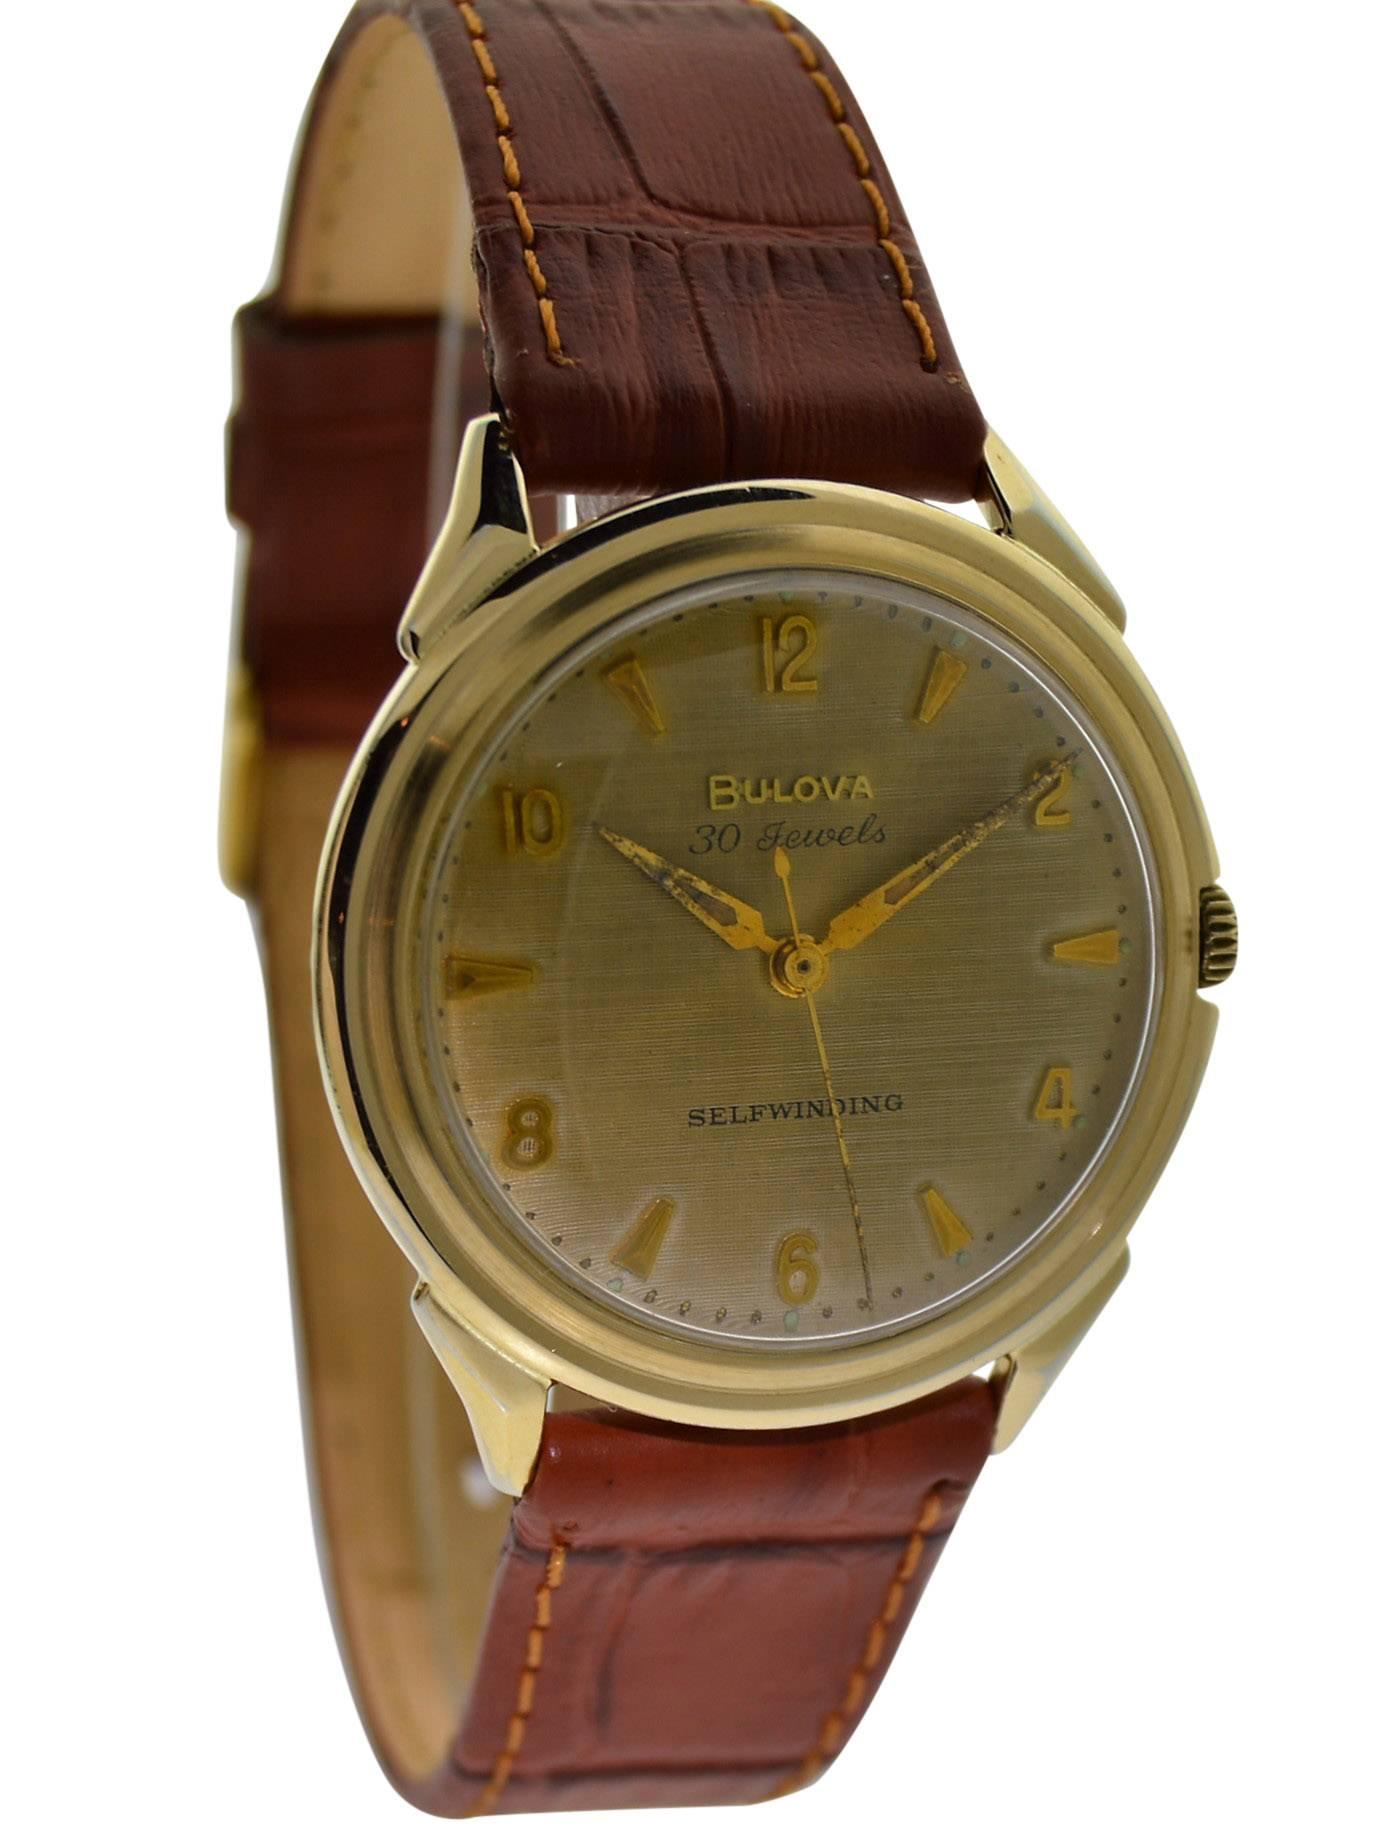 FACTORY / HOUSE: Bulova Watch Company
STYLE / REFERENCE: Round / Waterproof
METAL / MATERIAL: Yellow Gold Filled
CIRCA: 1960's
DIMENSIONS: 39mm X 35mm
MOVEMENT / CALIBER: Selfwinding / 30 Jewels 
DIAL / HANDS: Original with Gilt Finish and